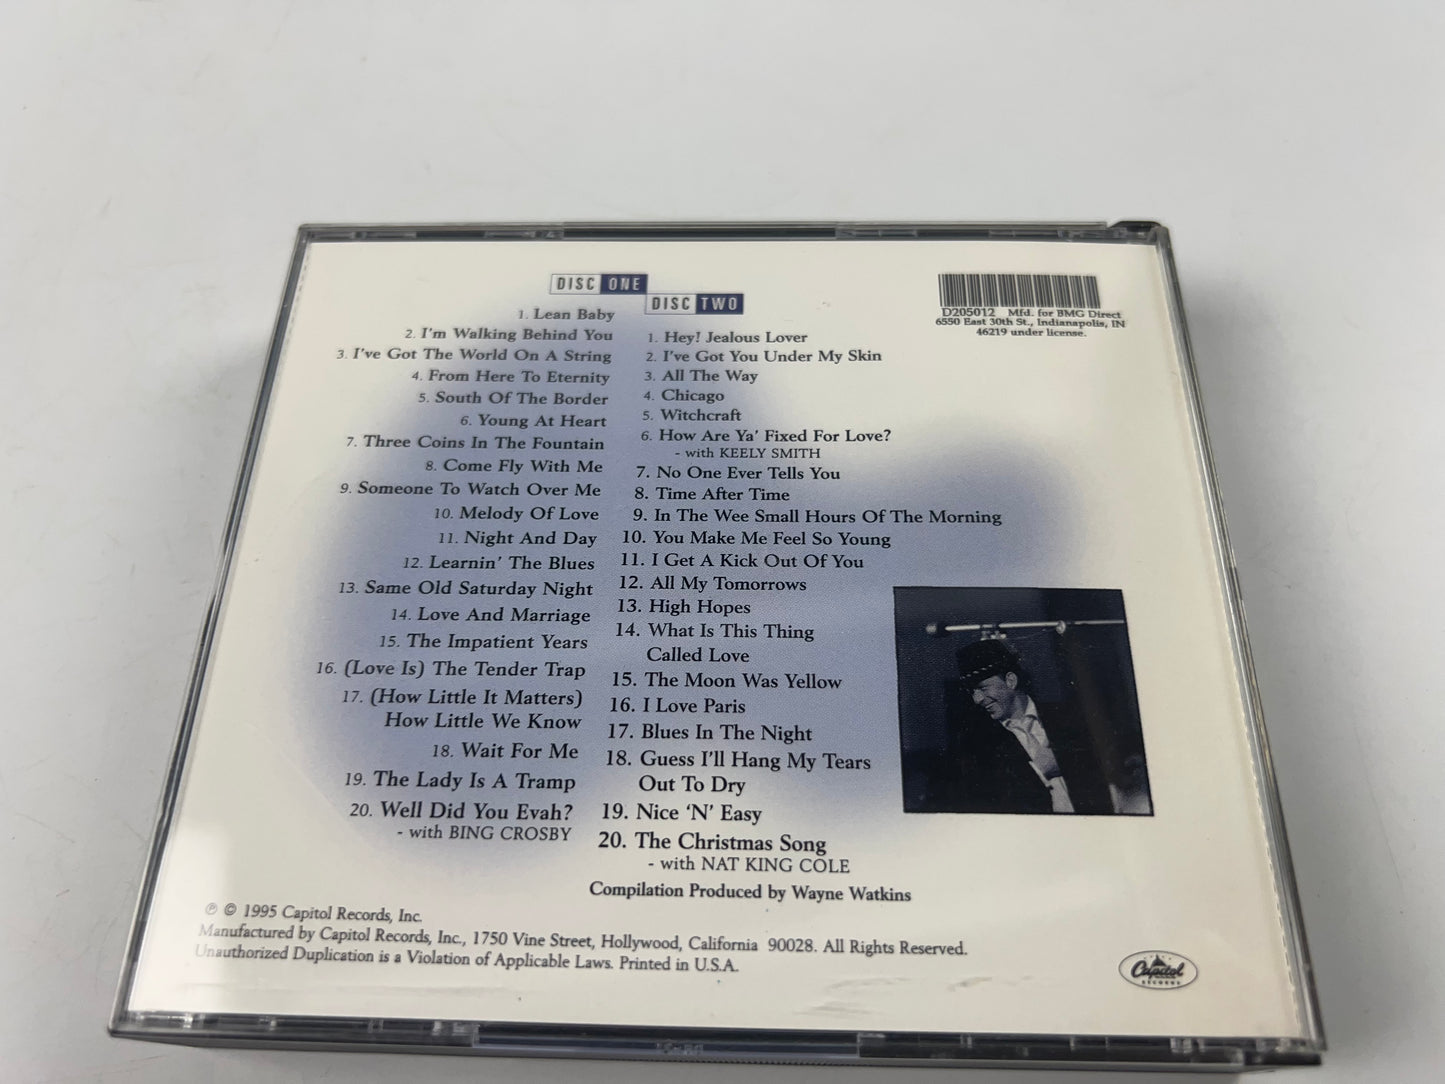 Frank Sinatra 2CD “Sinatra 80th: All the Best”. (Nat King Cole duet).